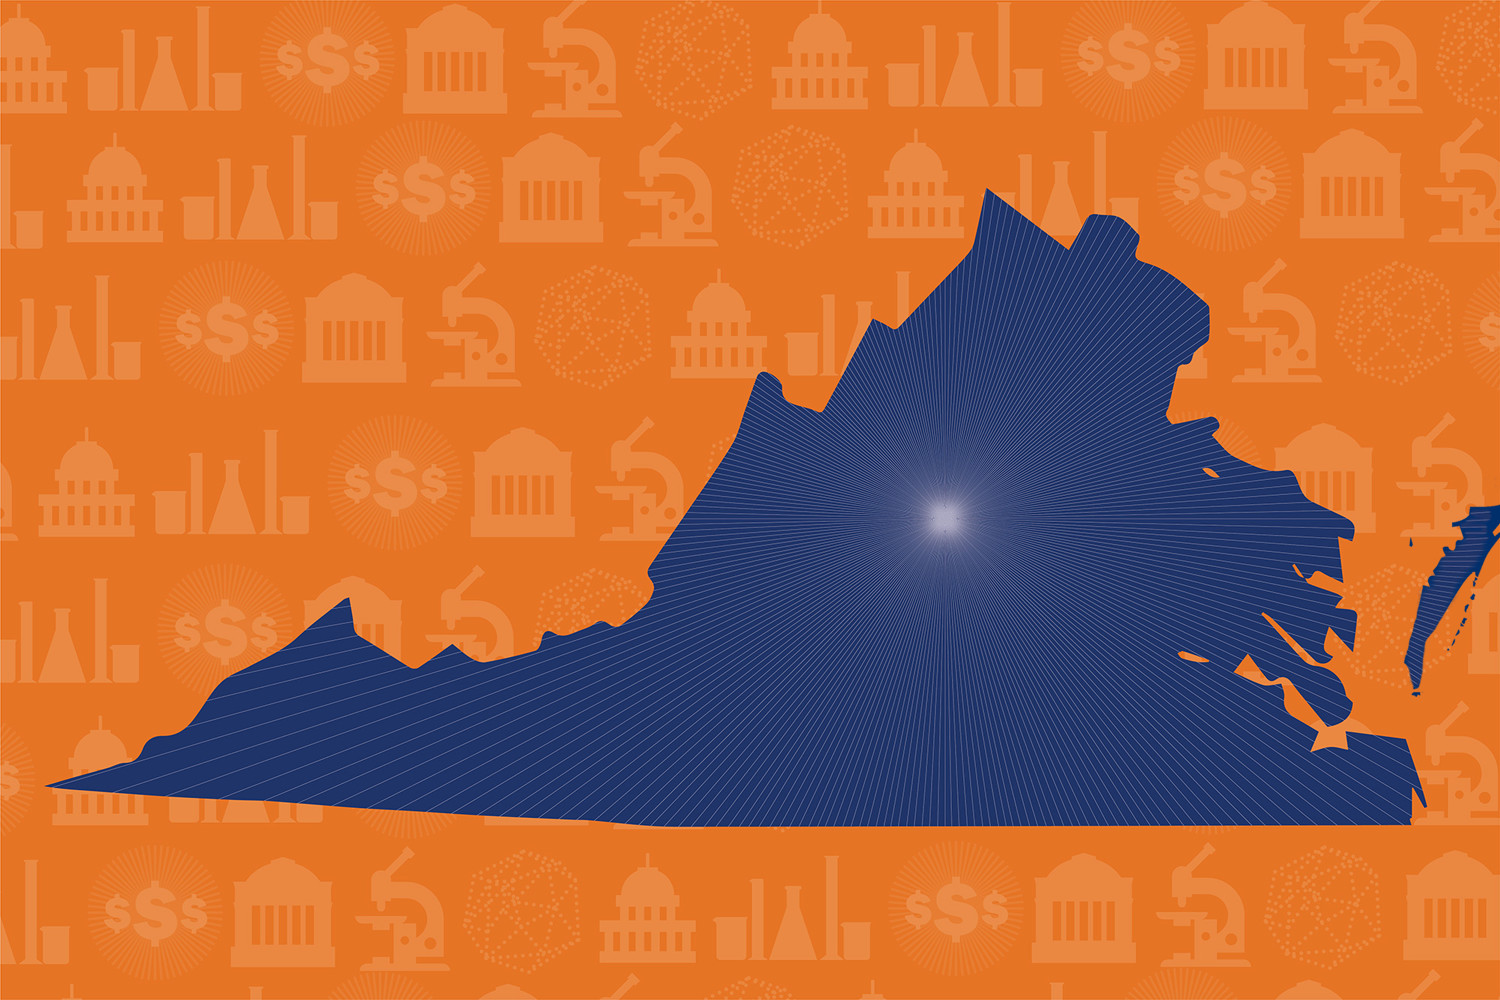 Blue state of Virginia on a an orange background